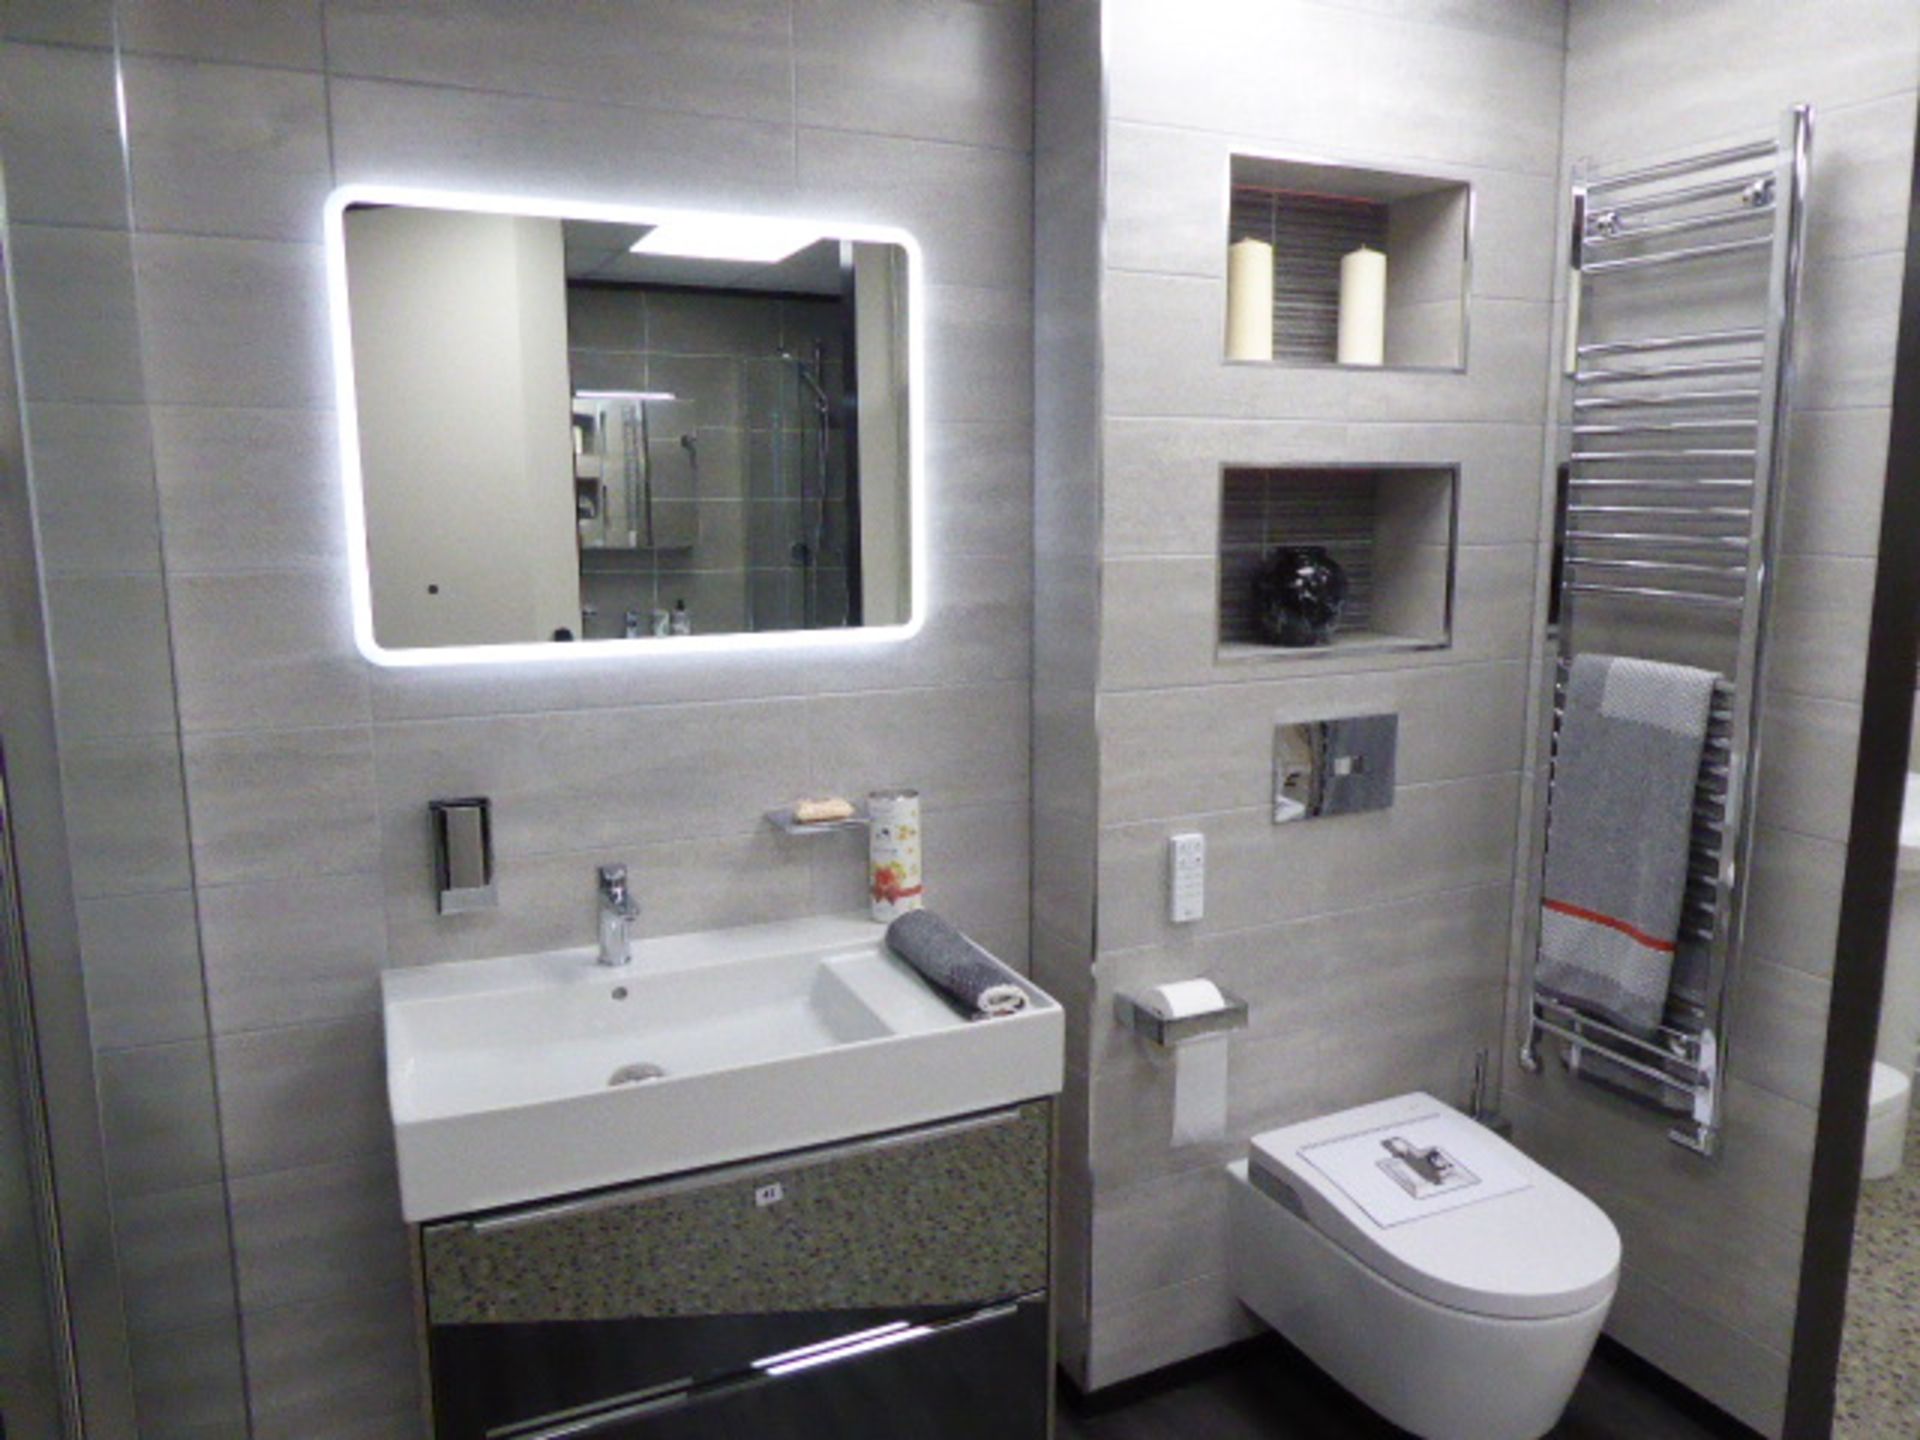 Roca Inspira shower suite including: Just Trays Evolved shower tray in mistral grey, 150x80cm; Roman - Image 2 of 9